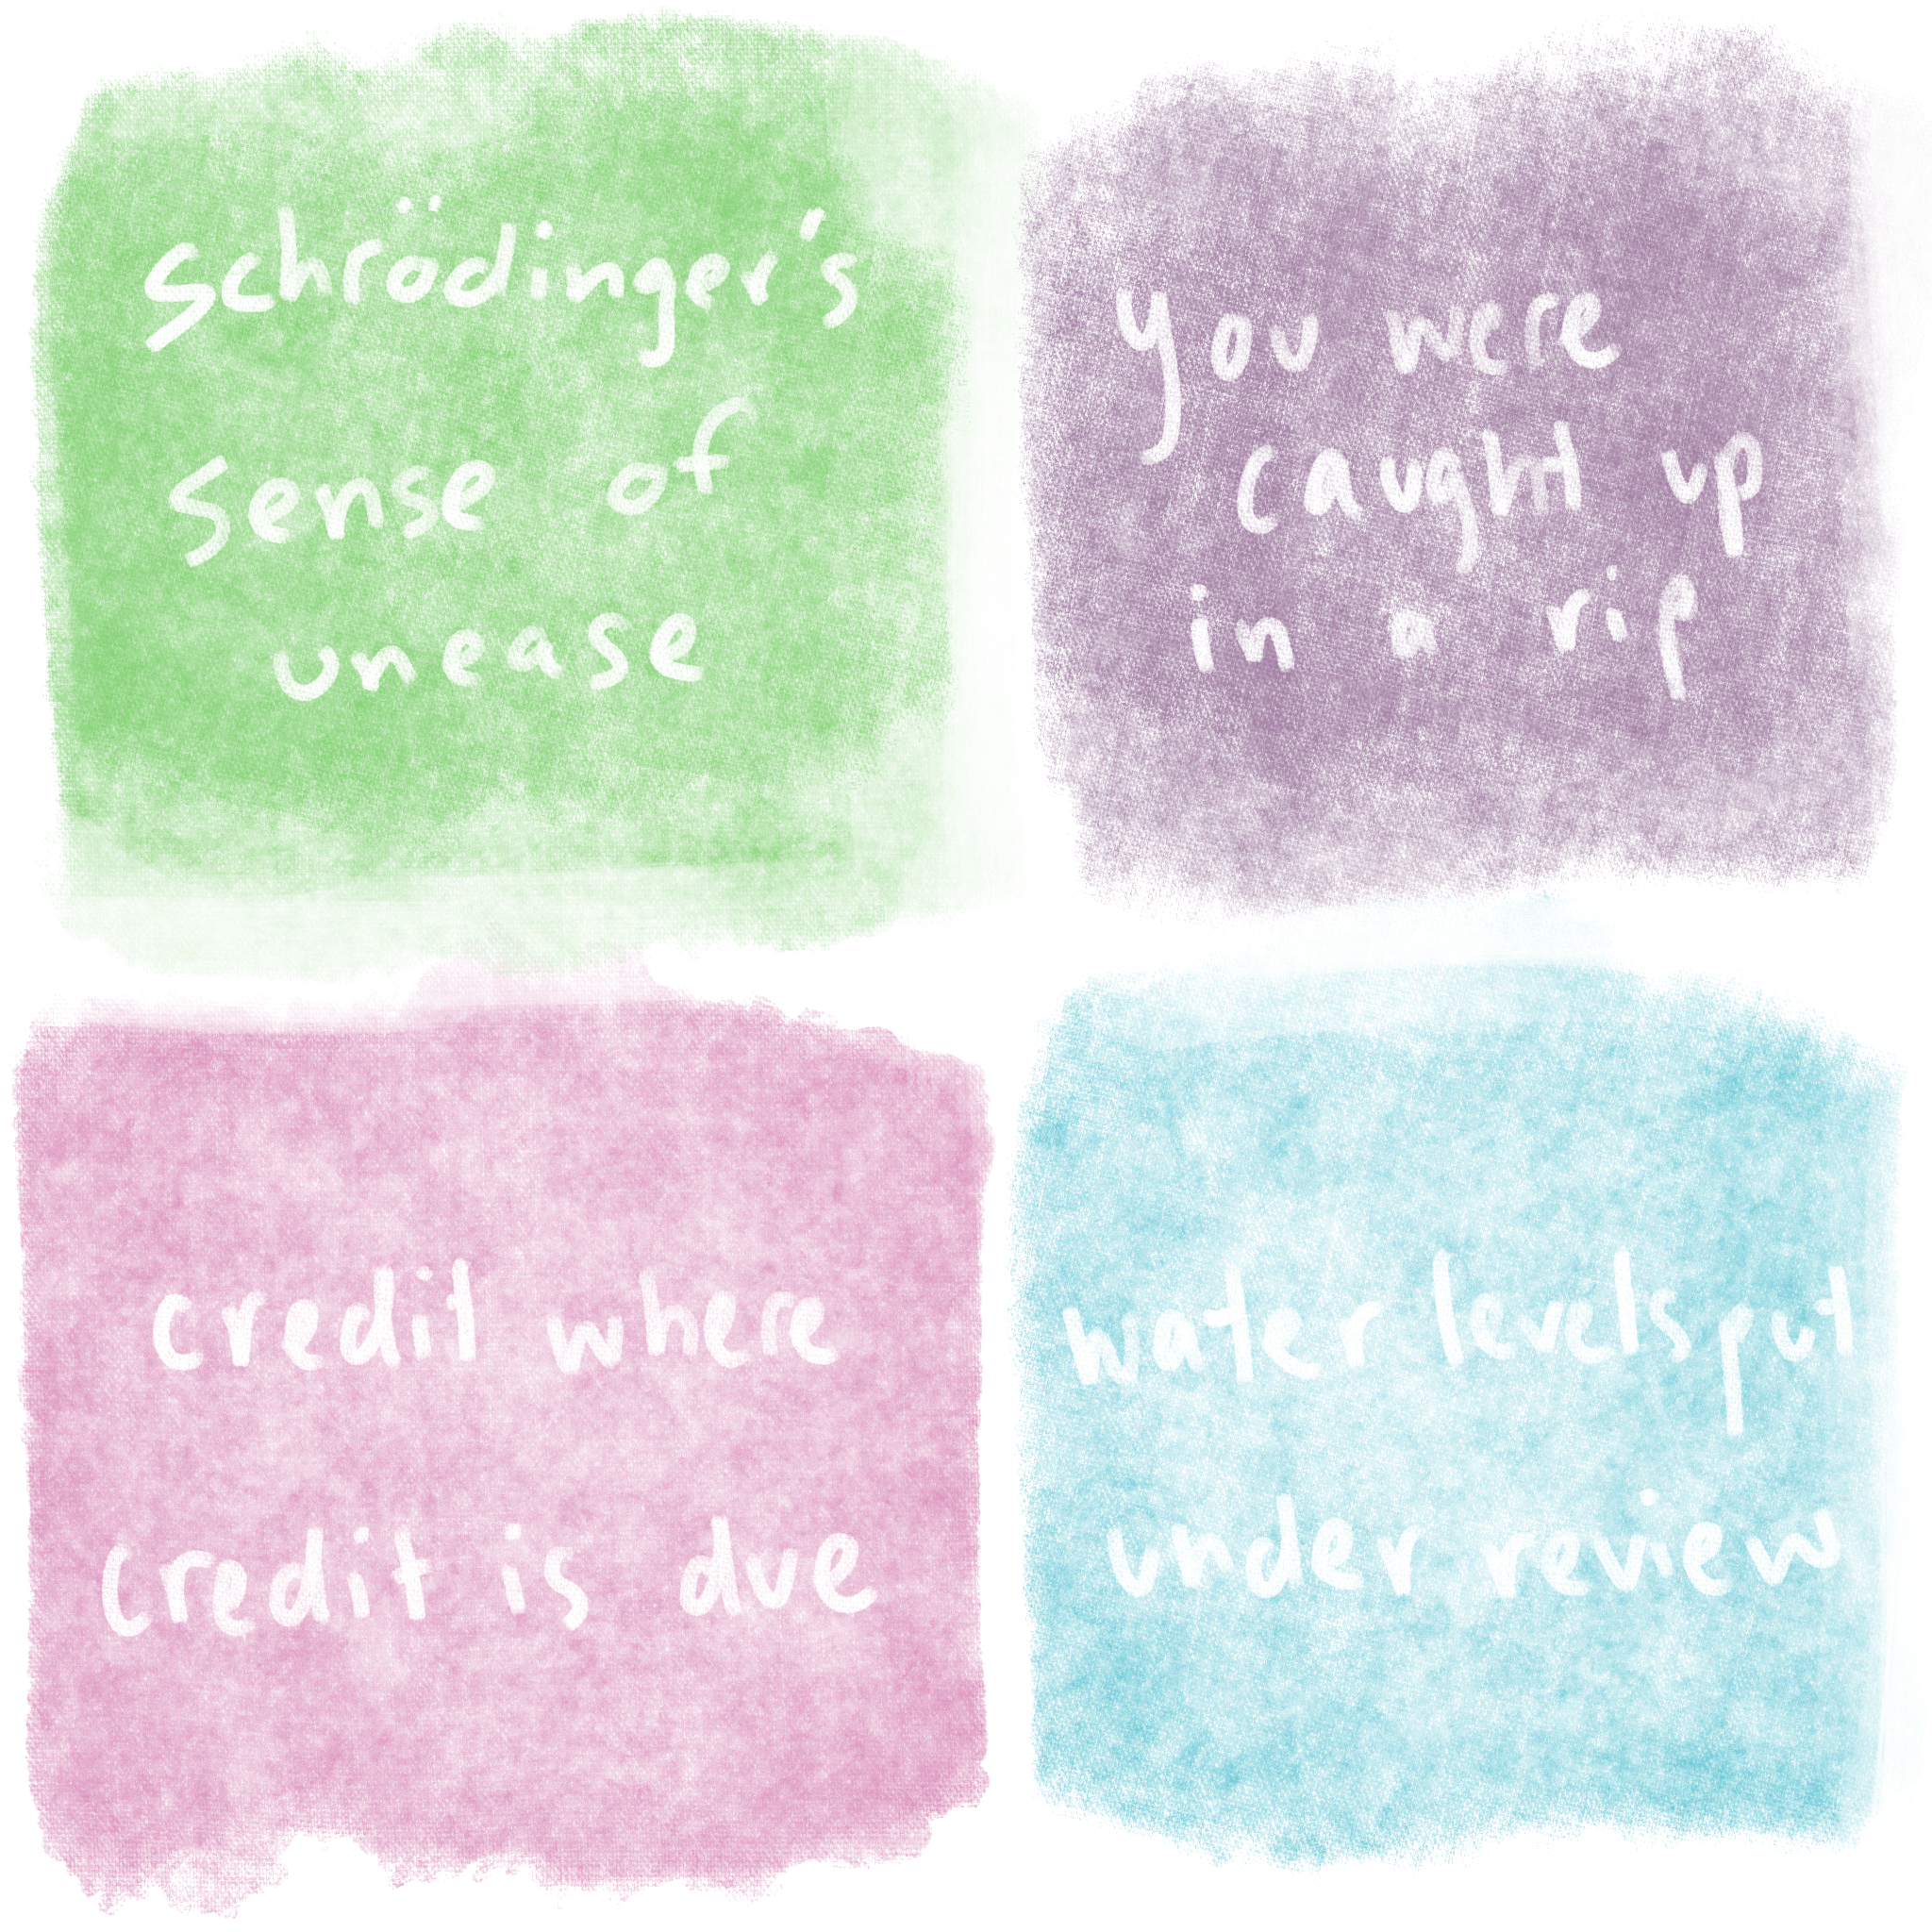 four squares of different colors with text on them. the first is green and says schroedinger's sense of unease, the second is purple and says you were caught up in a rip, the third is pink and says credit where credit is due, and the fourth is blue and says water levels put under review